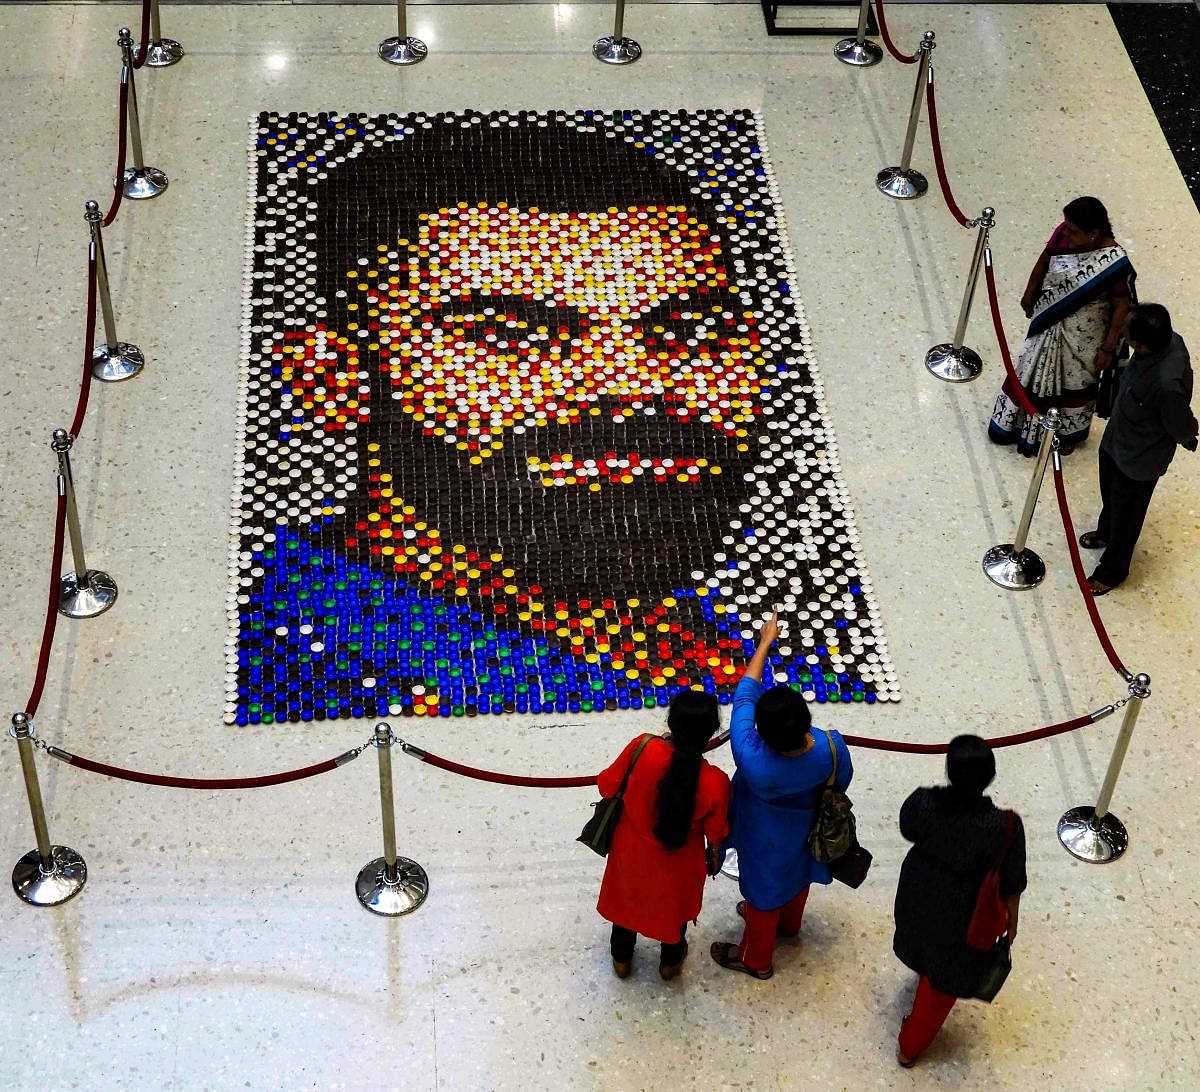 A diya mosaic created by artist Abaasaheb Shewale forming a portrait of Indian cricketer Virat Kohli ahead of his birthday, at a mall, in Mumbai, Tuesday, Oct 30, 2018. (PTI Photo)